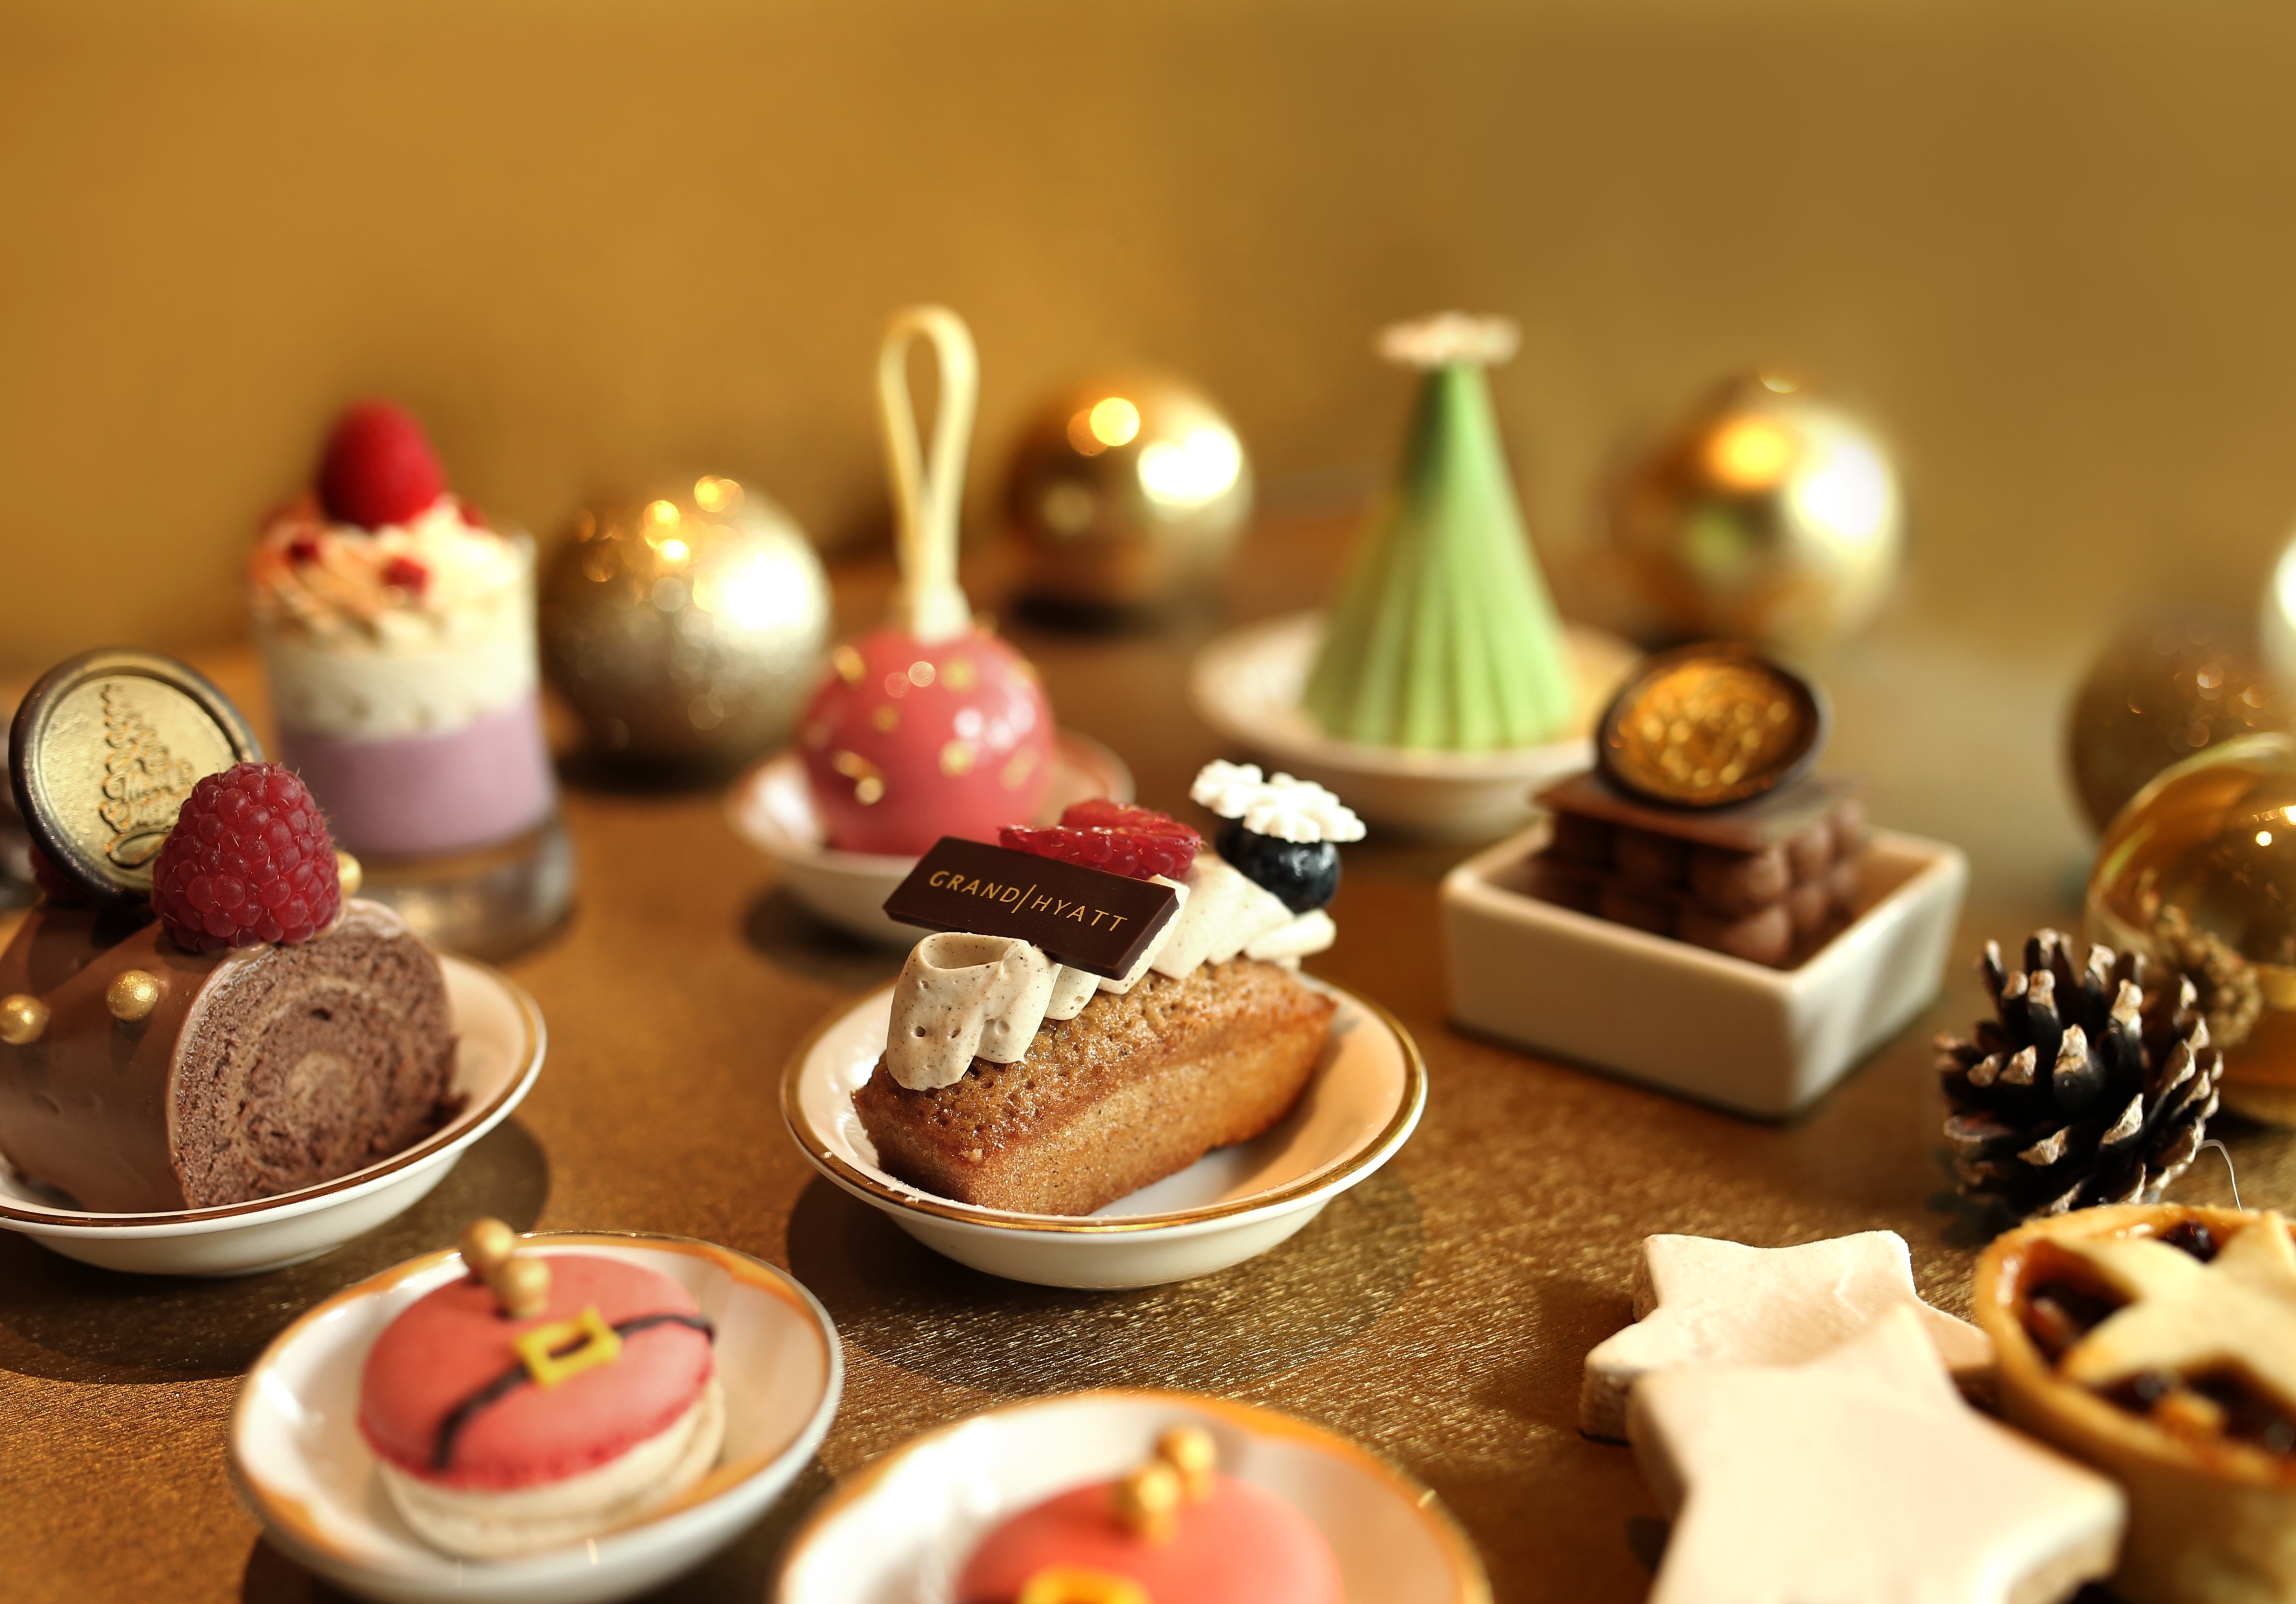 Lobby Lounge & Grand Club - Festive-inspired pastries and savories